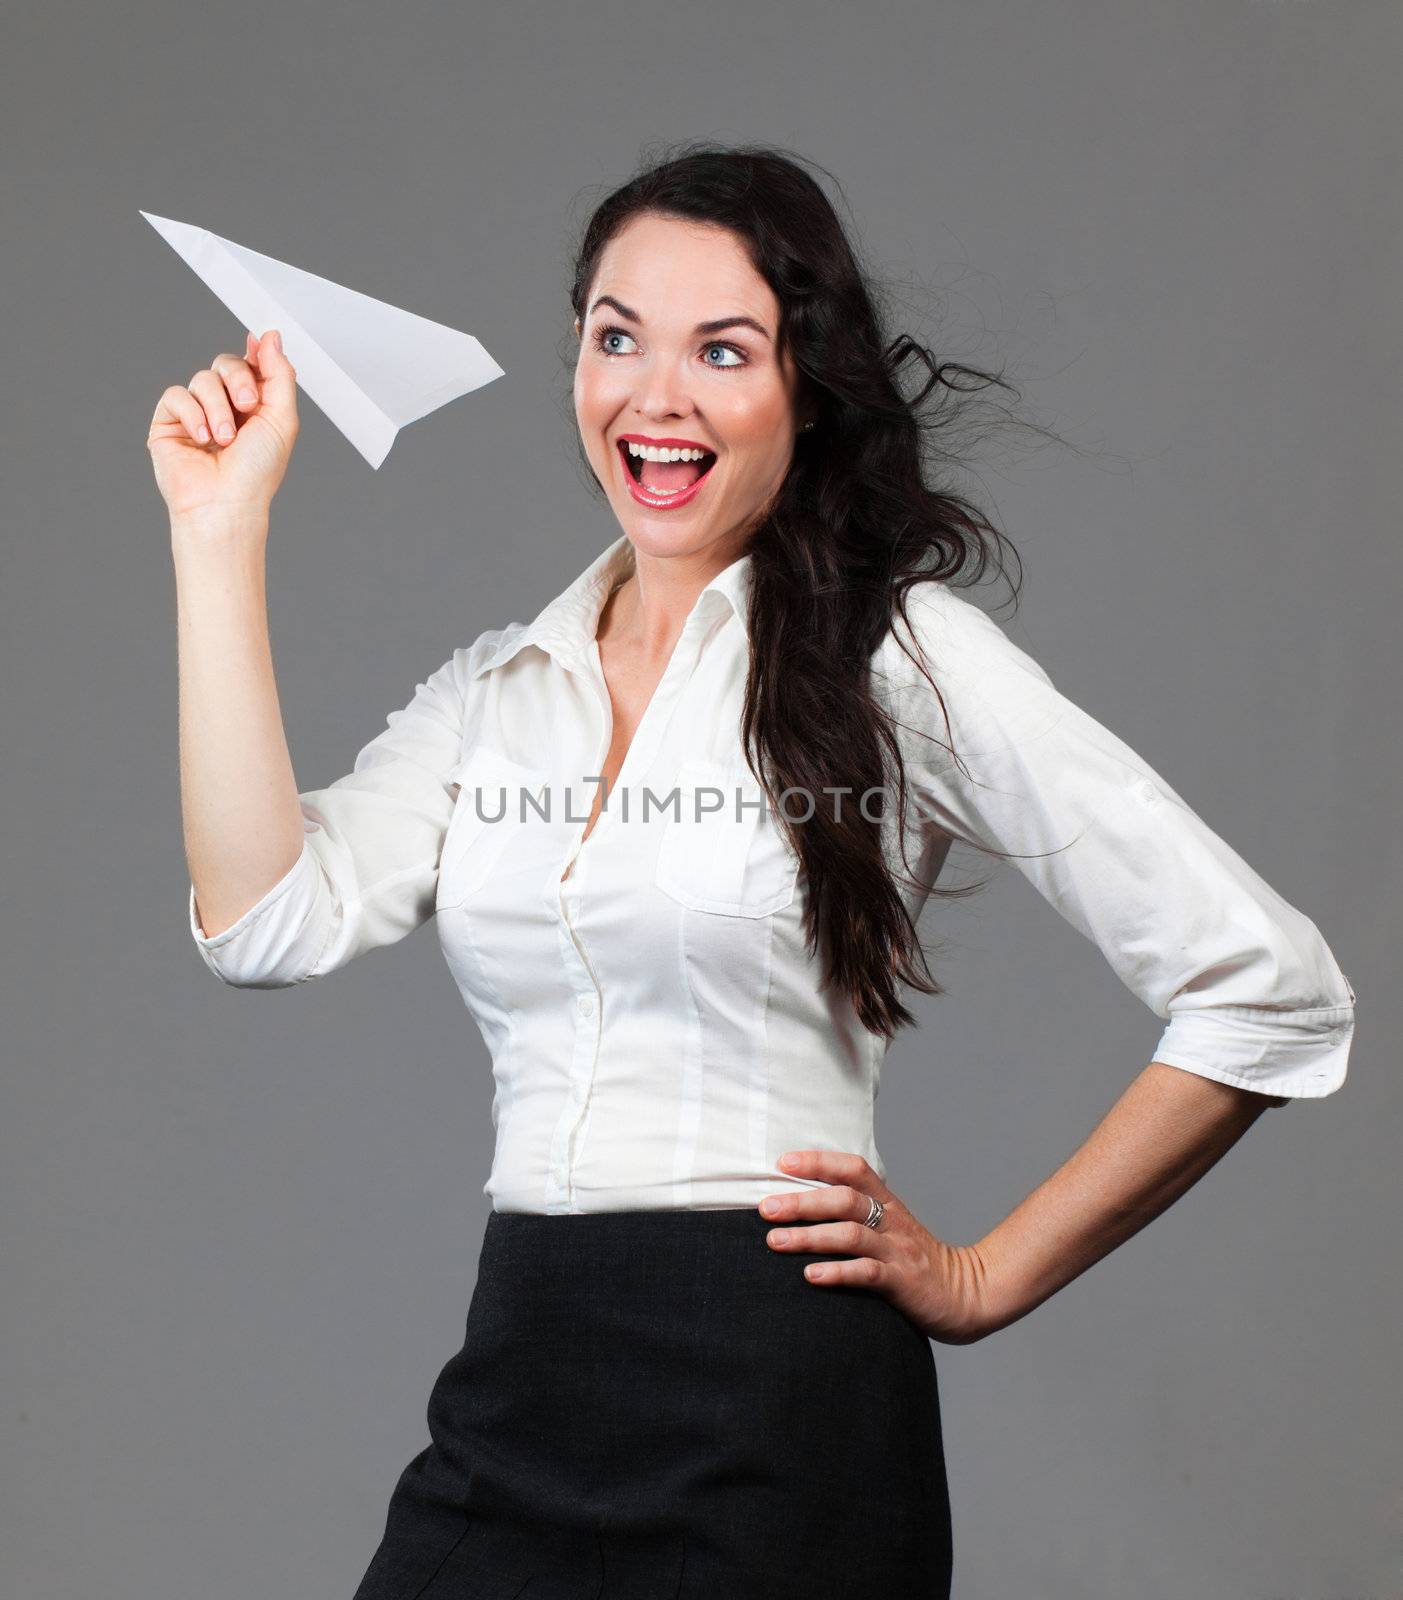 Beautiful young business woman holding a paper airplane smiling